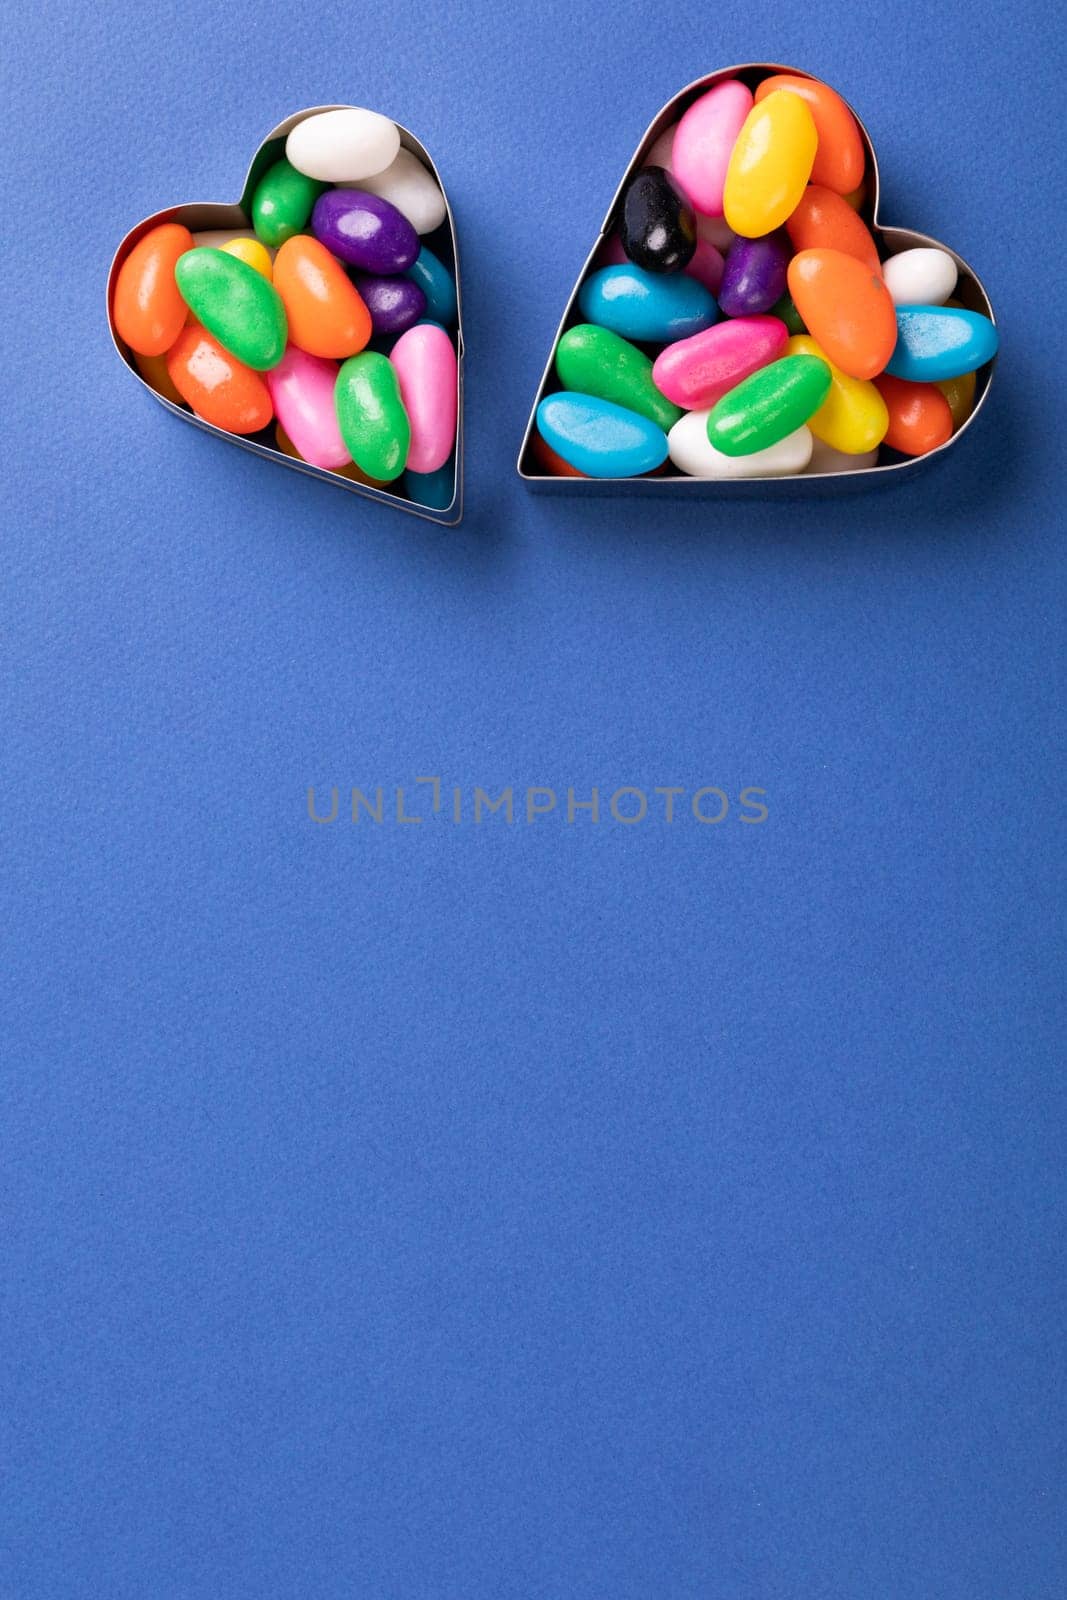 Overhead view of colorful candies inside heart shape containers over copy space on blue background by Wavebreakmedia